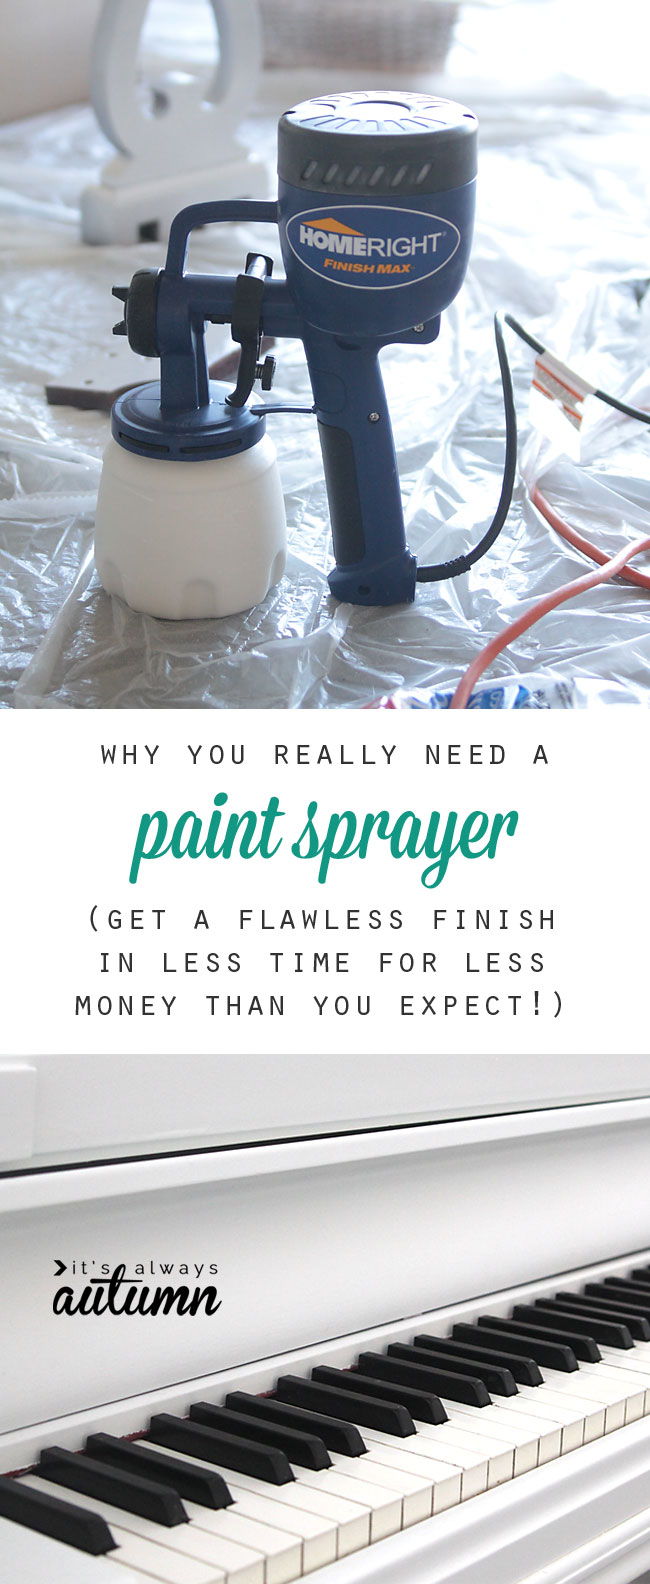 paint sprayer and piano that\'s been painted white